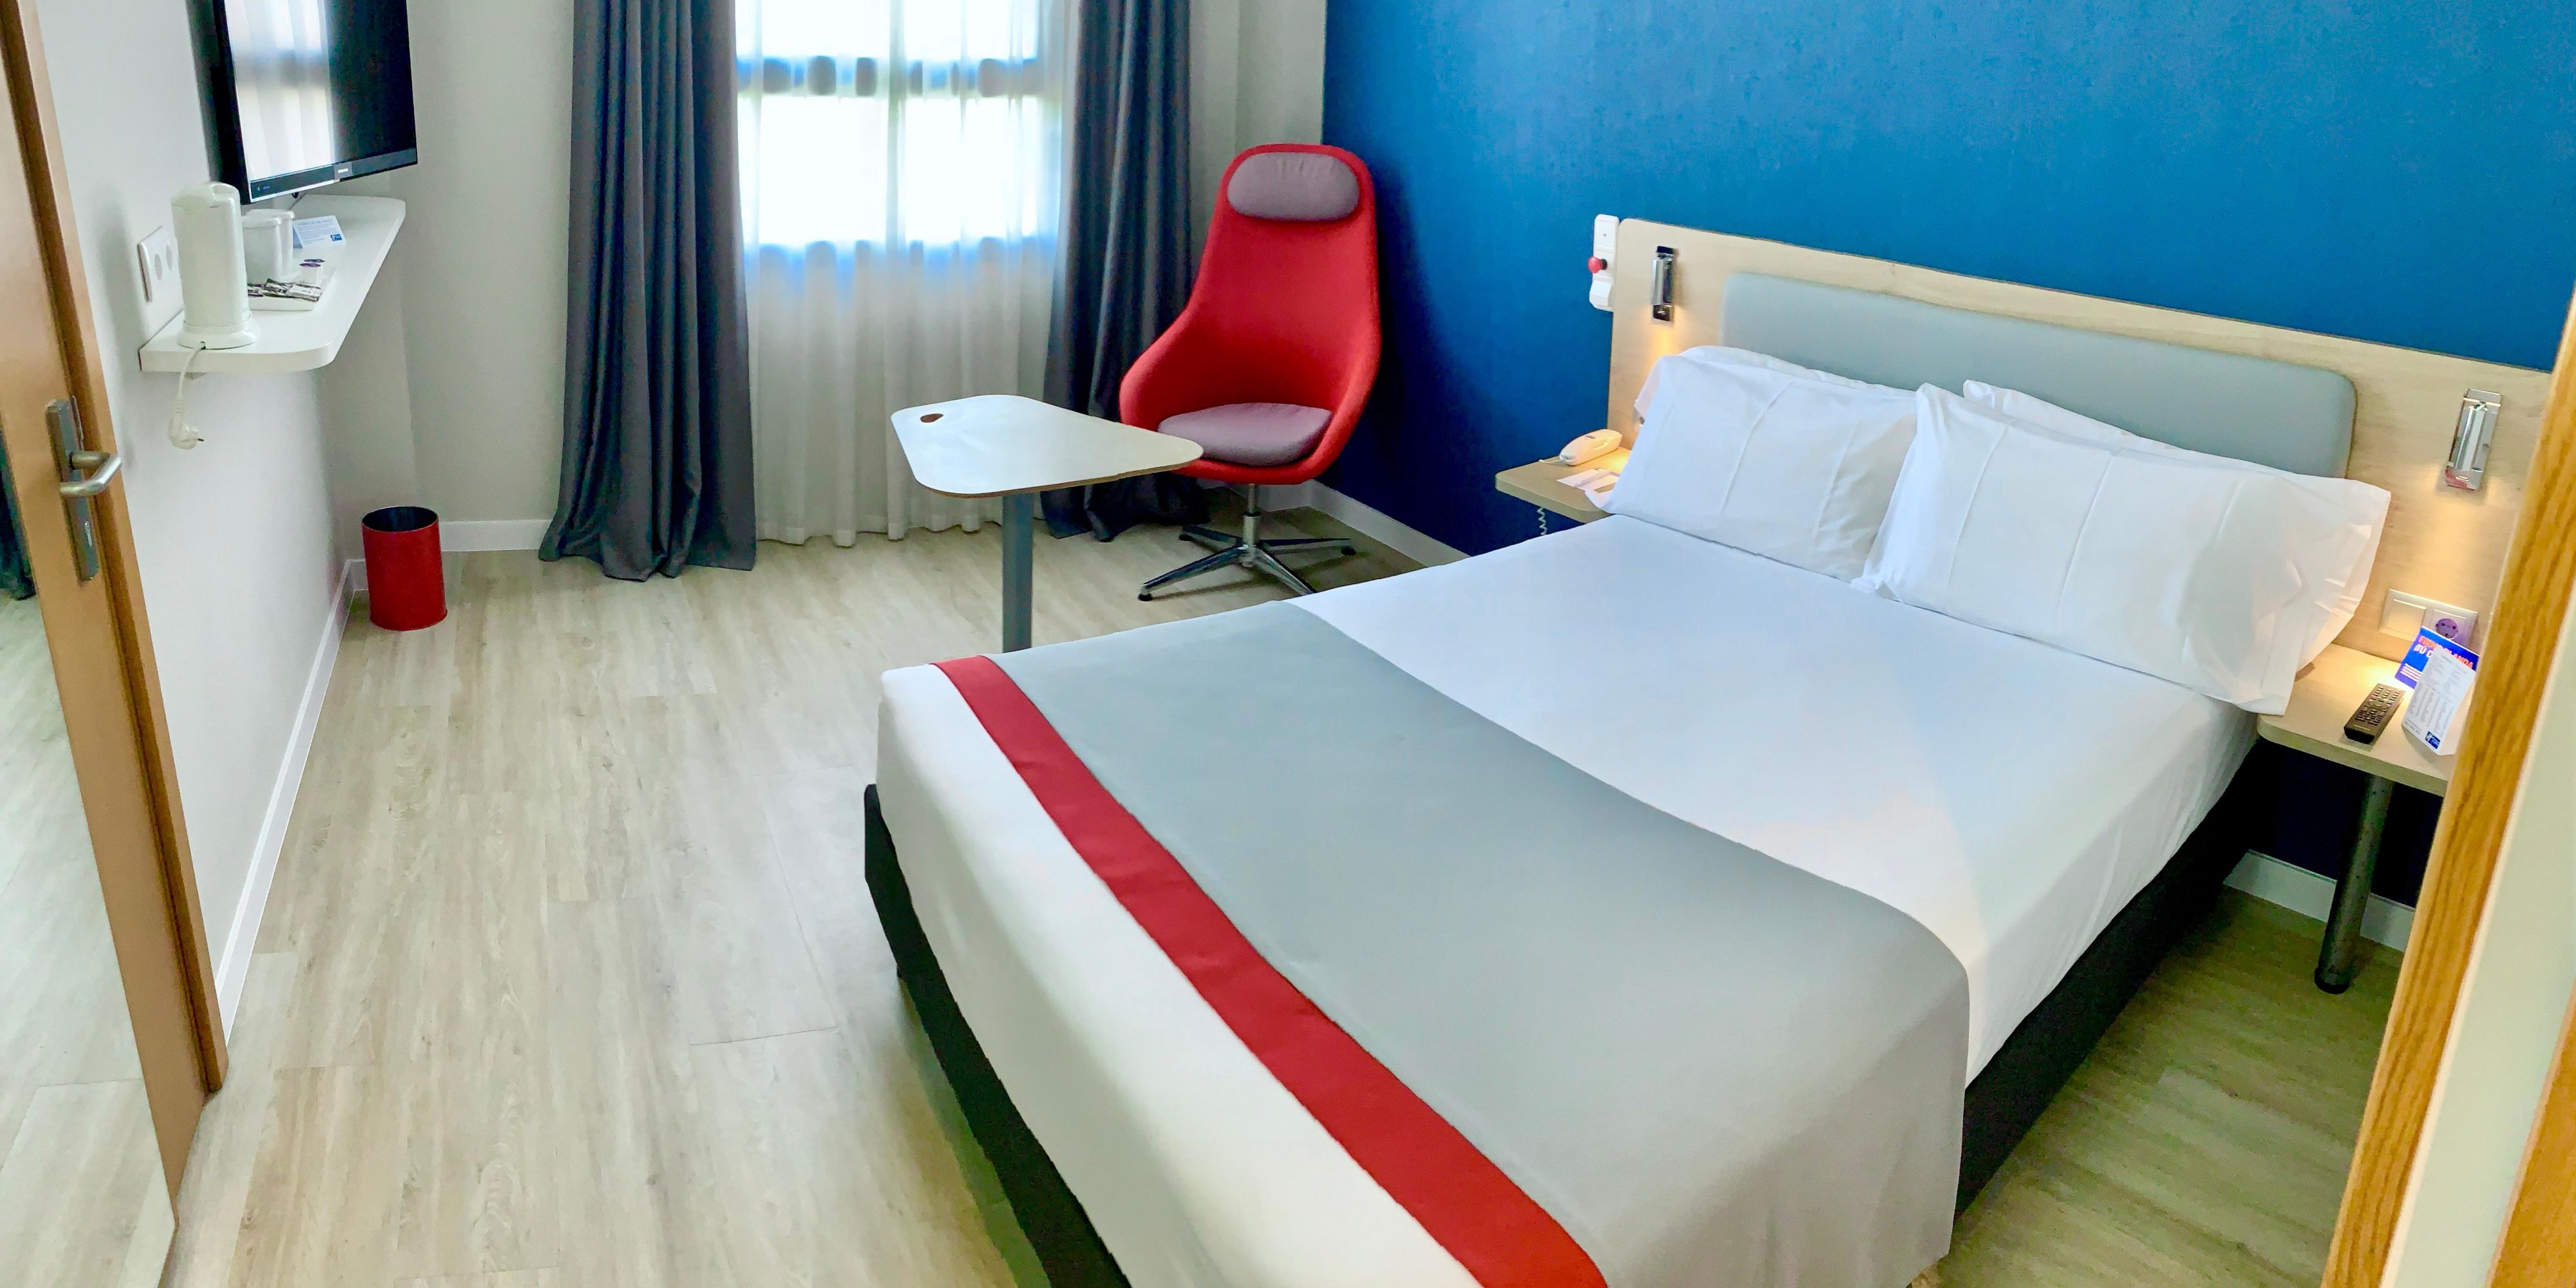 We remind you that at the Holiday Inn Express Valencia CC we have the best spaces, both to spend the night and to meet or even work. Consult with our professionals, they will advise you on the best option for your needs. We follow strict security and cleaning protocols against COVID-19, so you can be sure you are safe being accommodated with us!